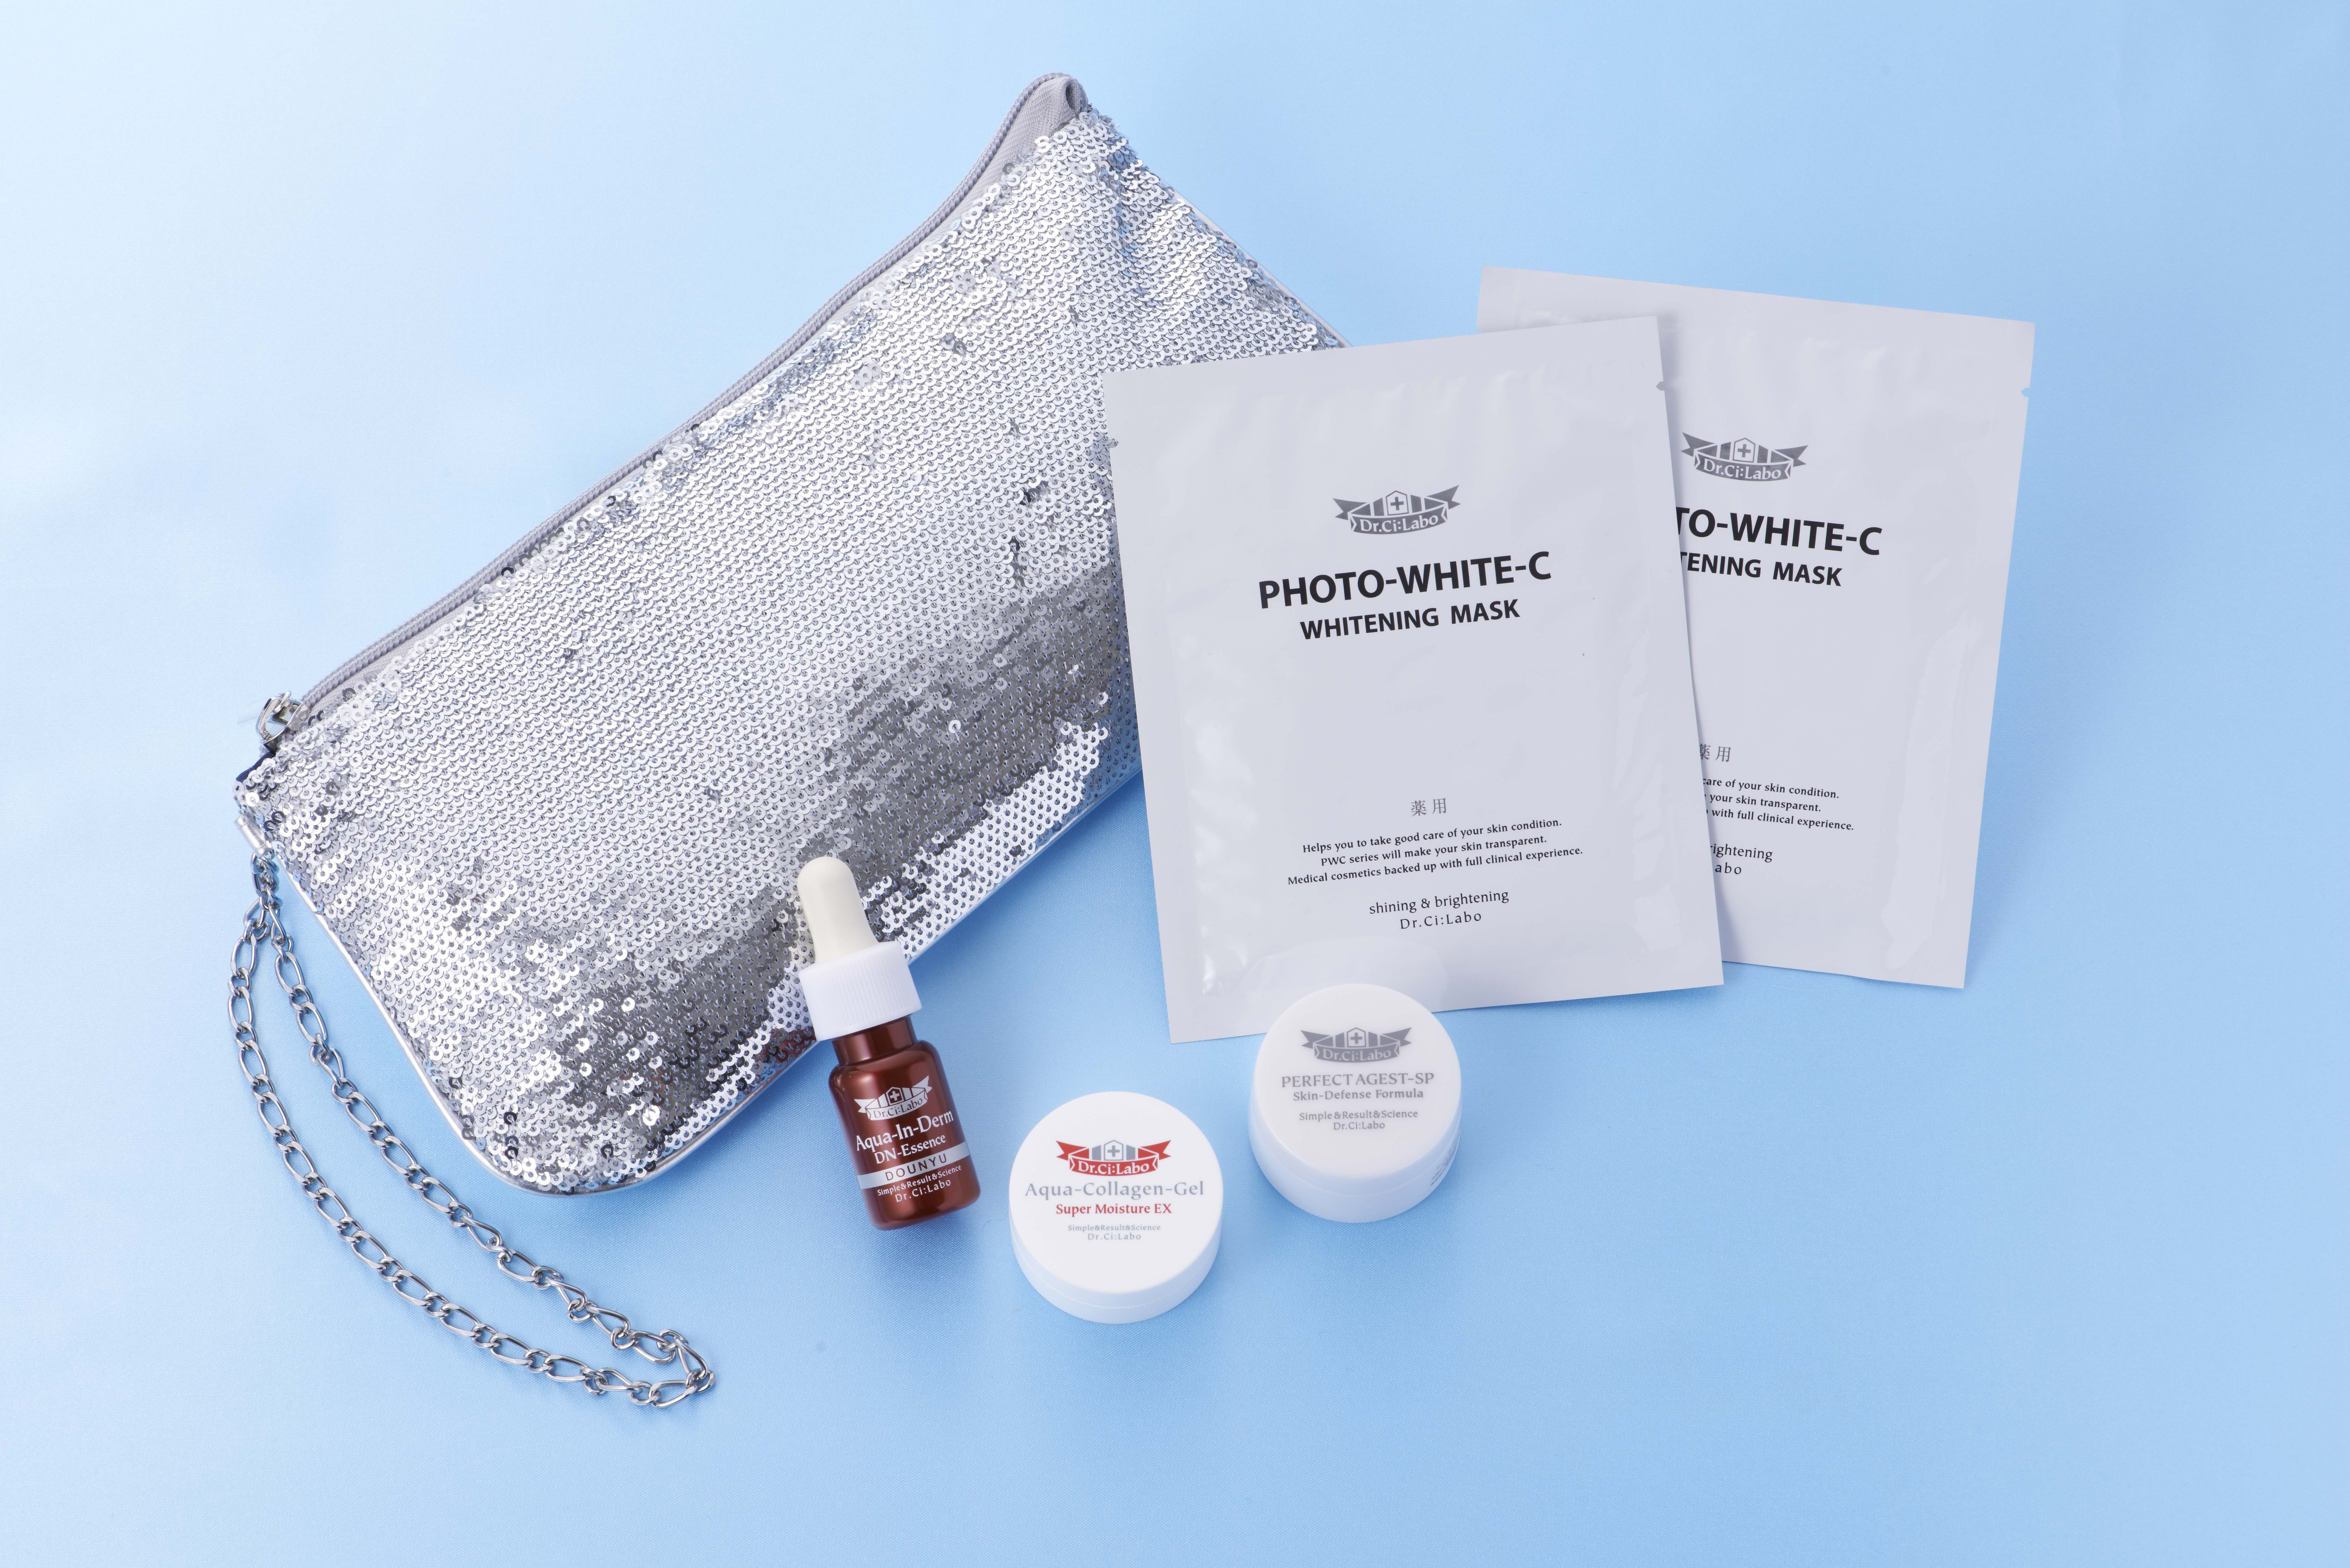 For a limited time only, customers who purchase the full-size Aqua-Collagen-Gel Super Moisture EX product will receive a sample kit with six products and a gorgeous silver clutch.